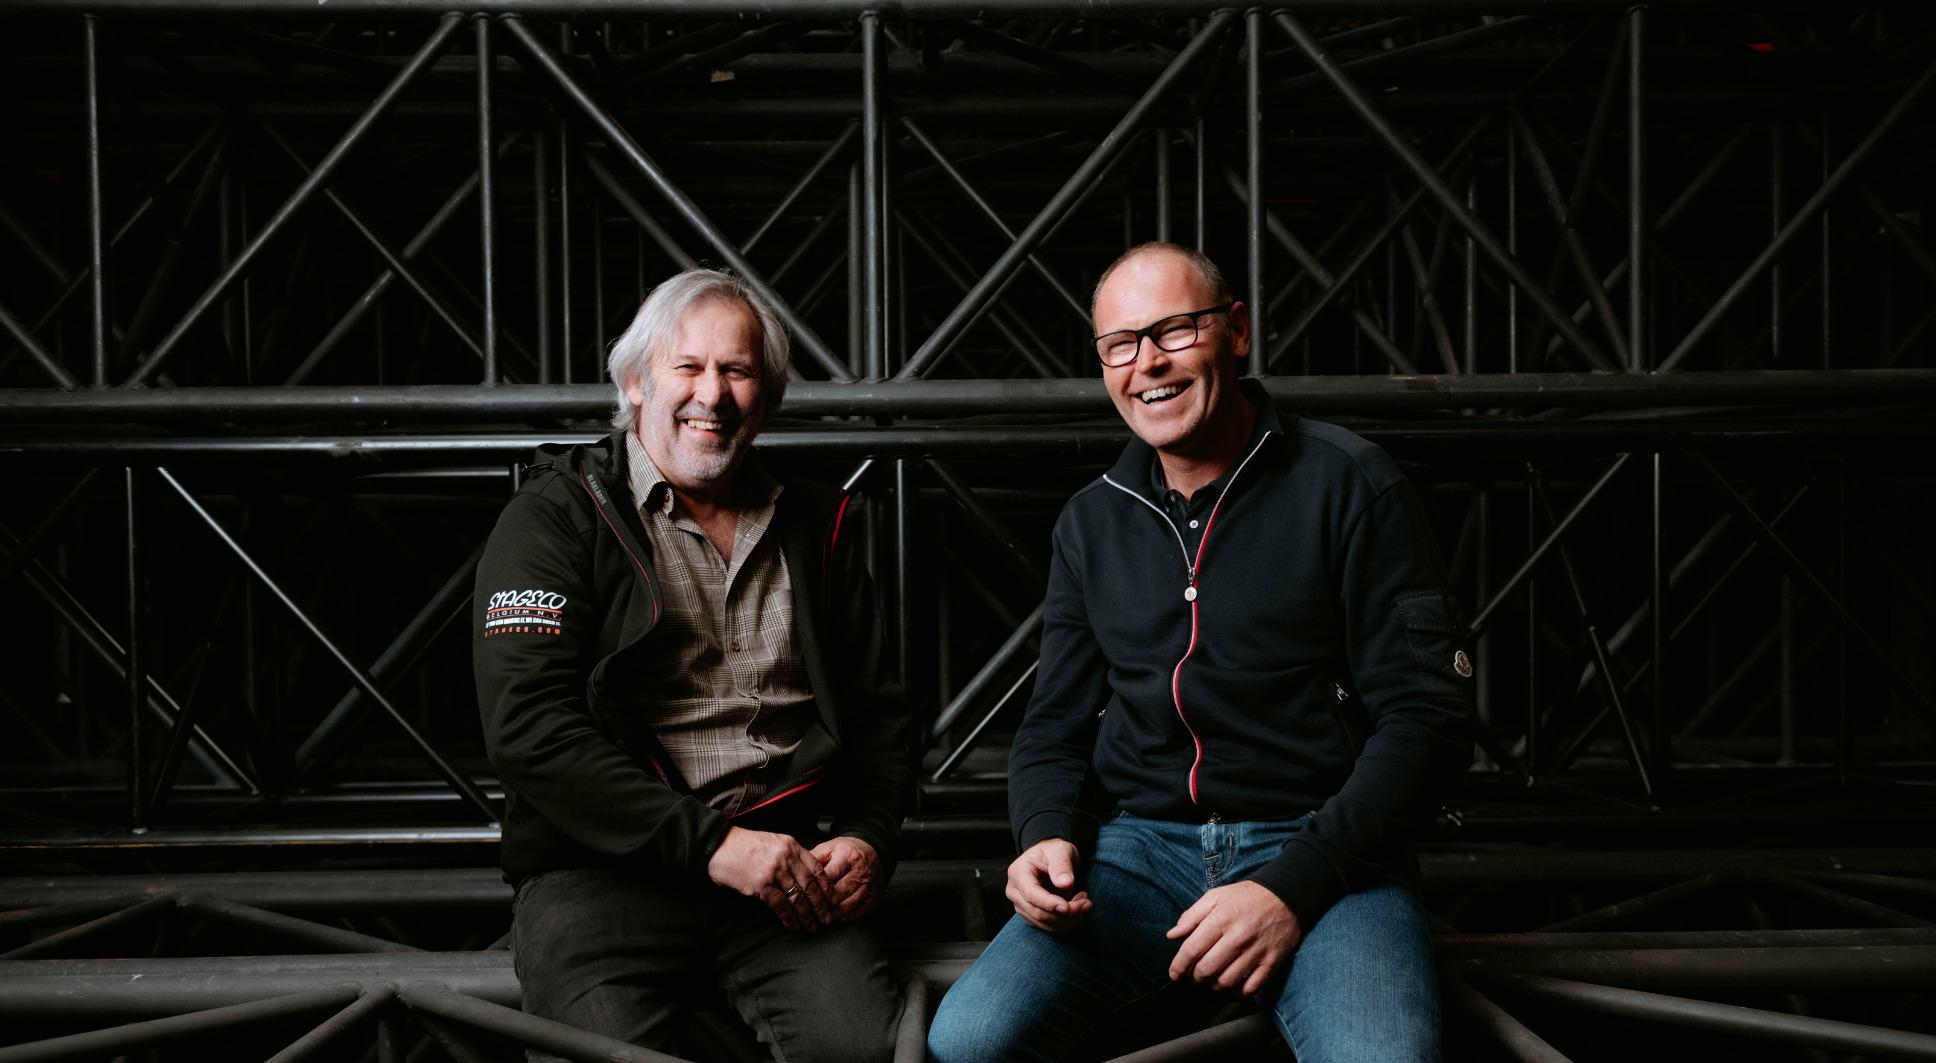 STAGECO FOUNDER HEDWIG DE MEYER TO BE SUCCEEDED BY WICREATIONS’ HANS WILLEMS AS CEO